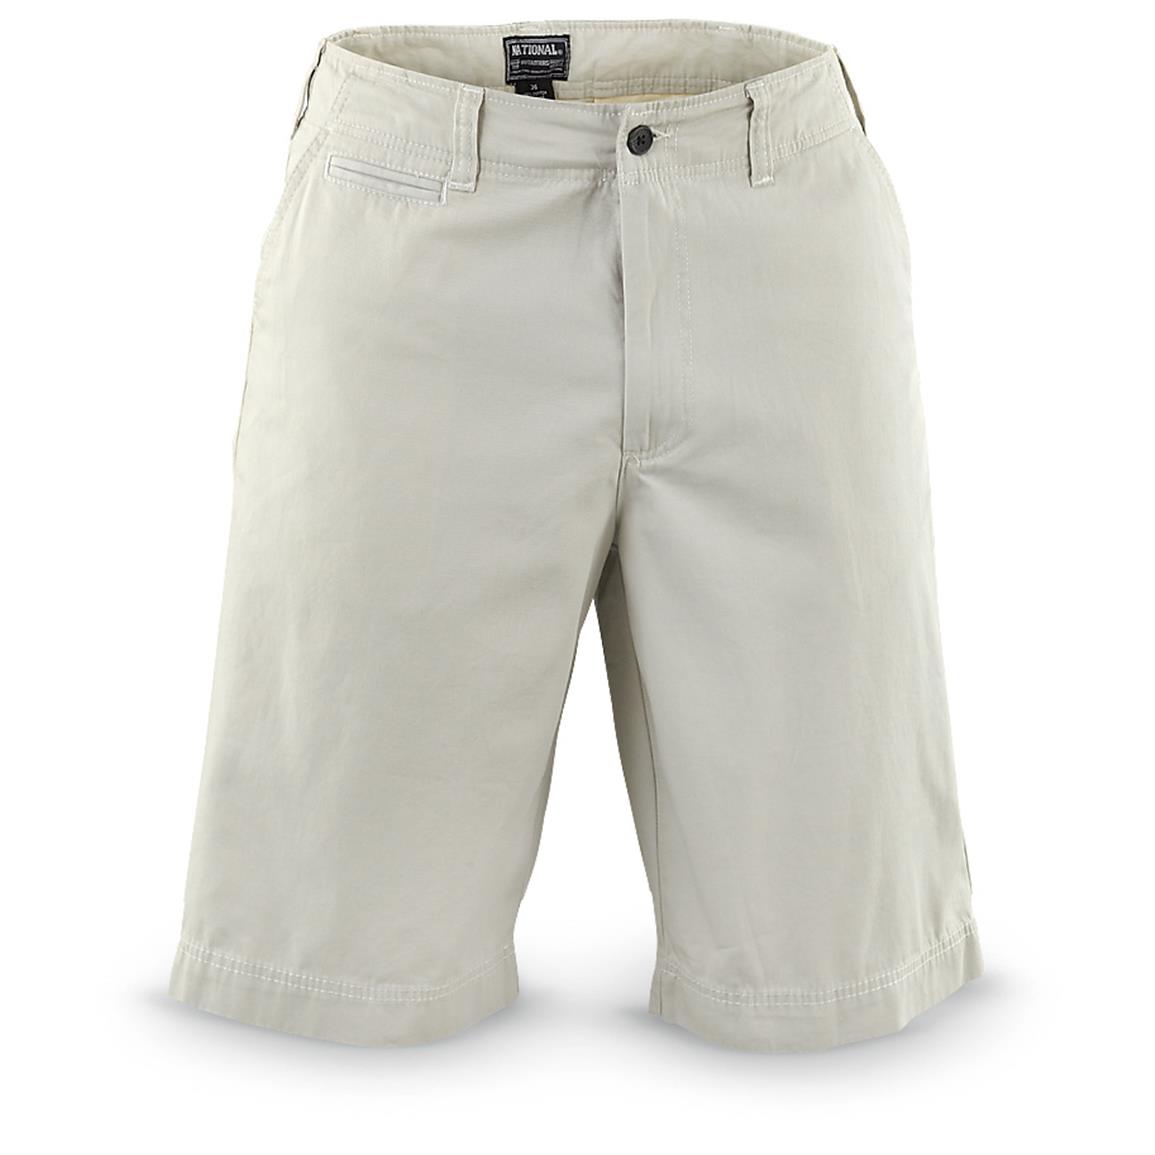 National Outfitters Twill Shorts - 607536, Shorts at Sportsman's Guide